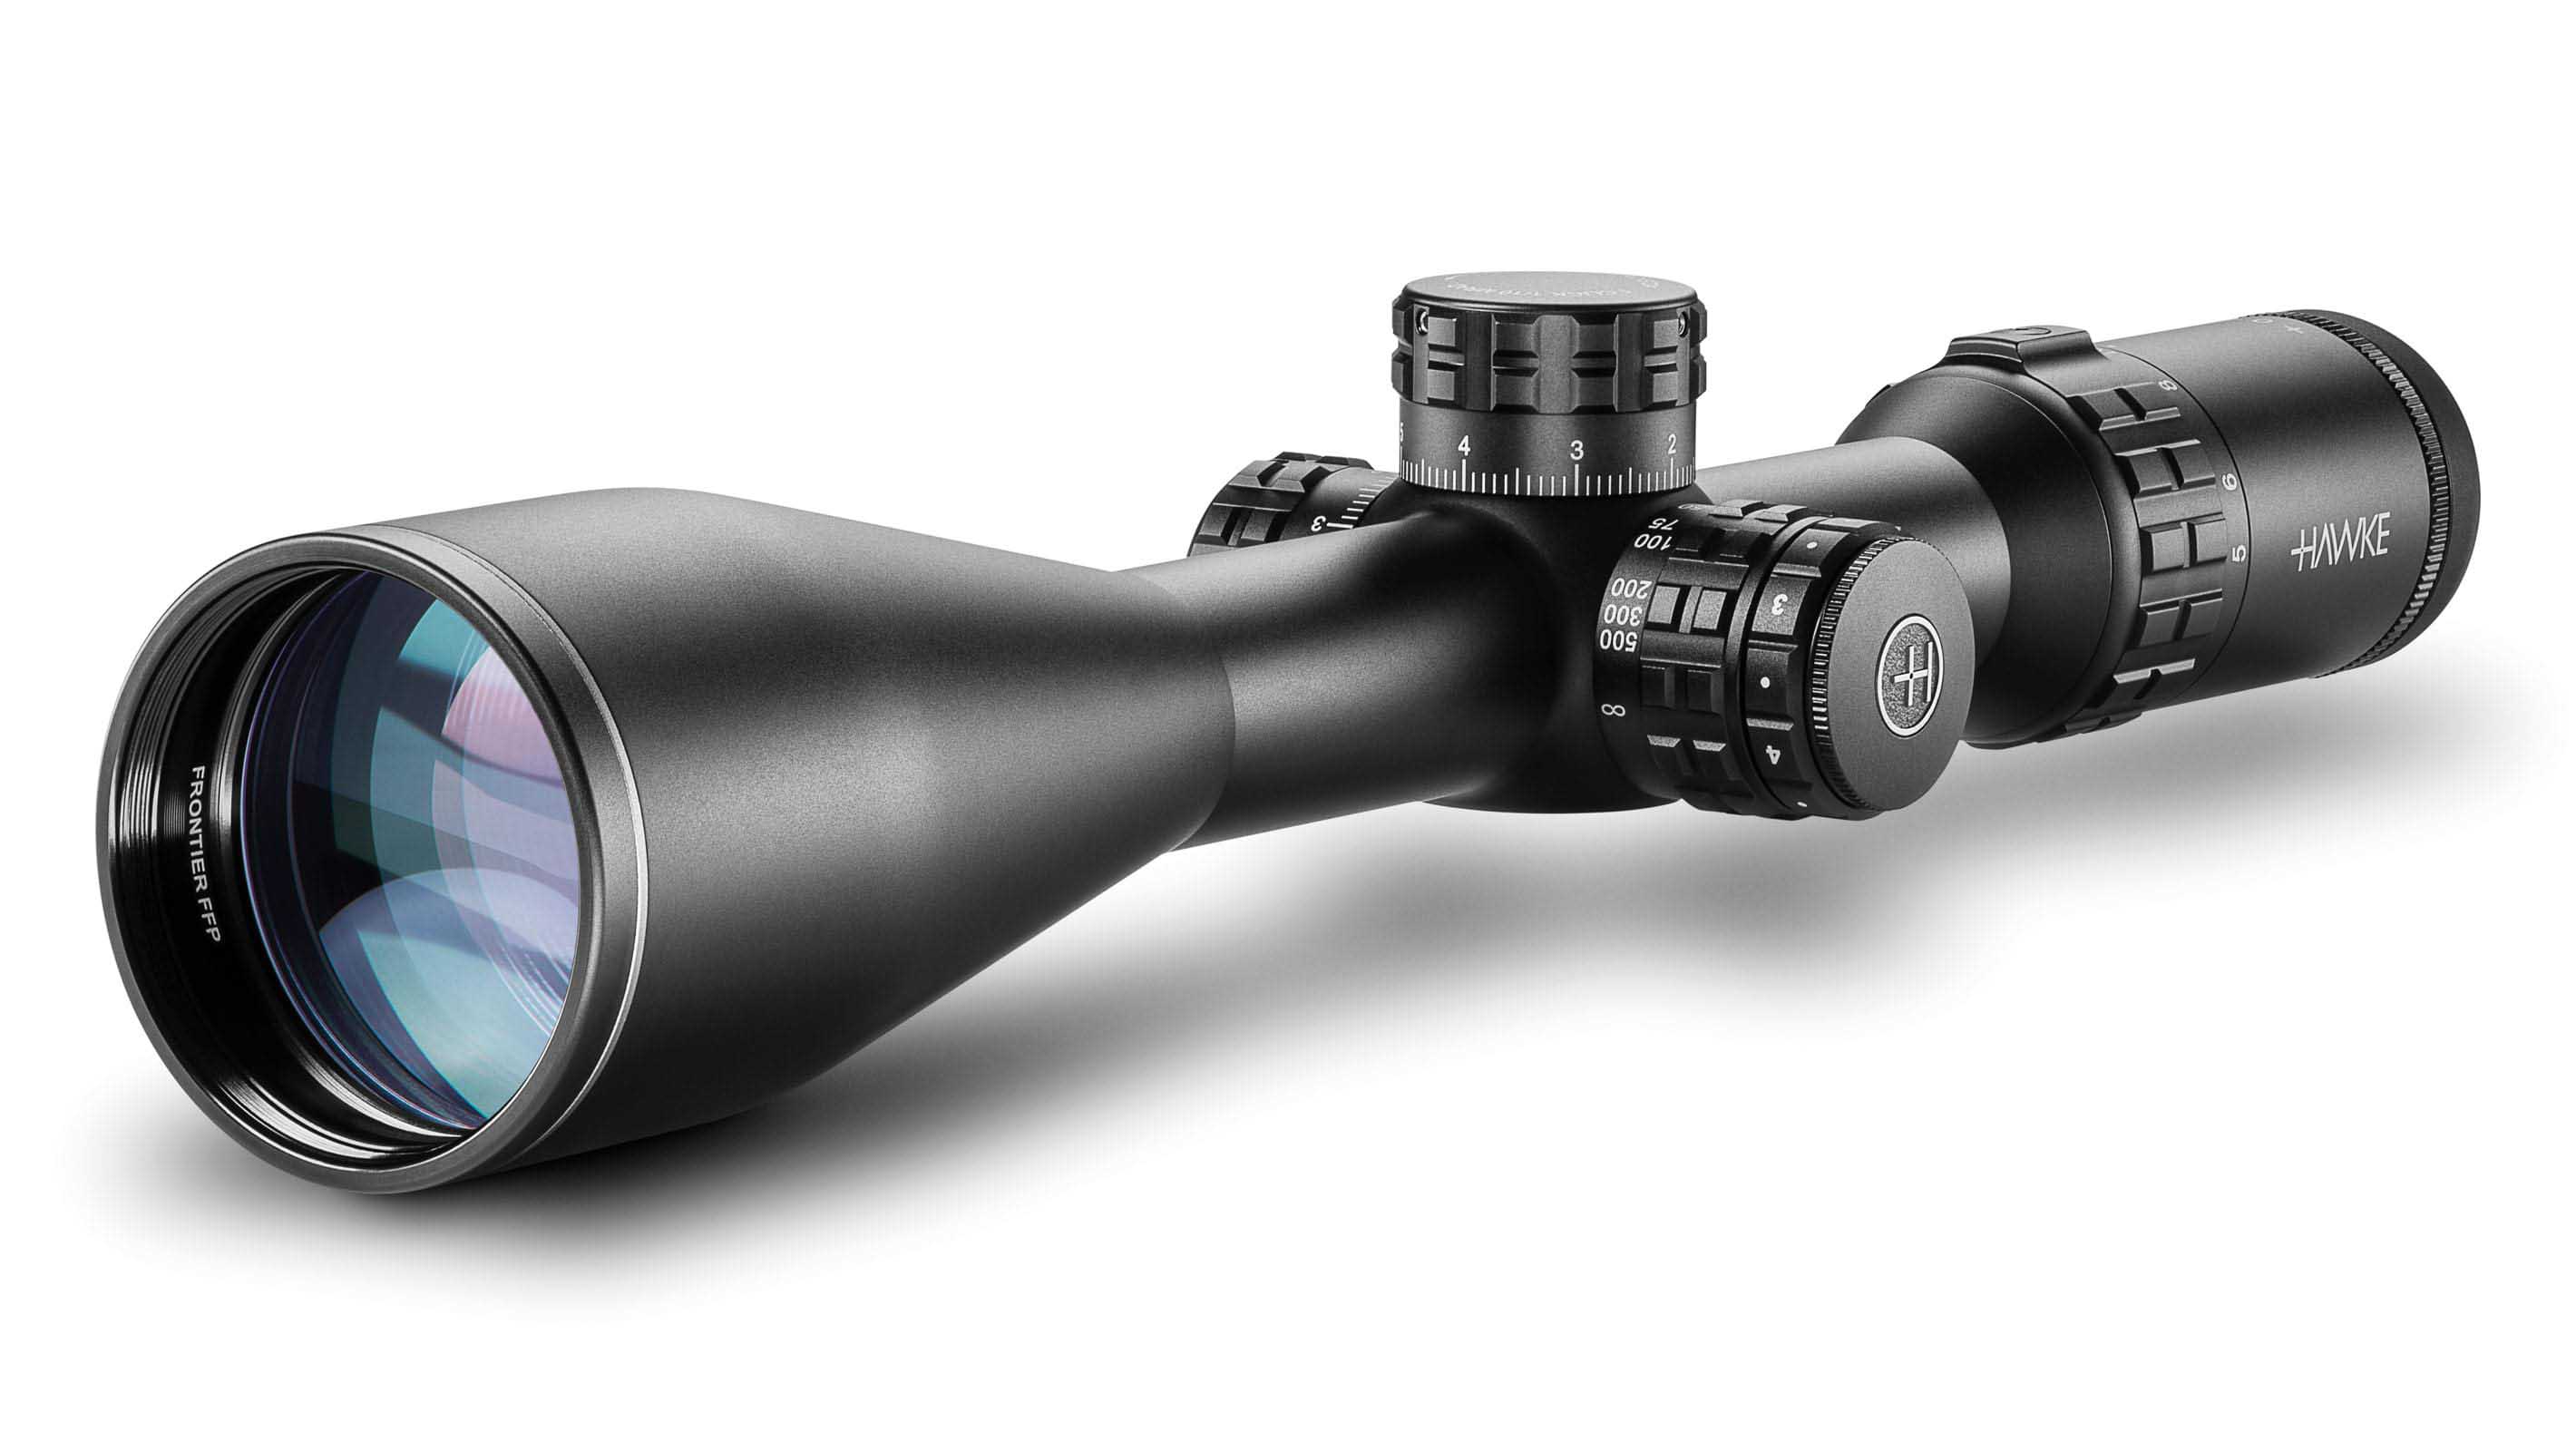 Hawke Frontier FFP 5-25x56 SF - FFP Mil Ext. Illuminated Riflescope #18330 reduced from $699.99 to only $499.99 Hawke_Riflescope_Frontier_FFP_5-25x56